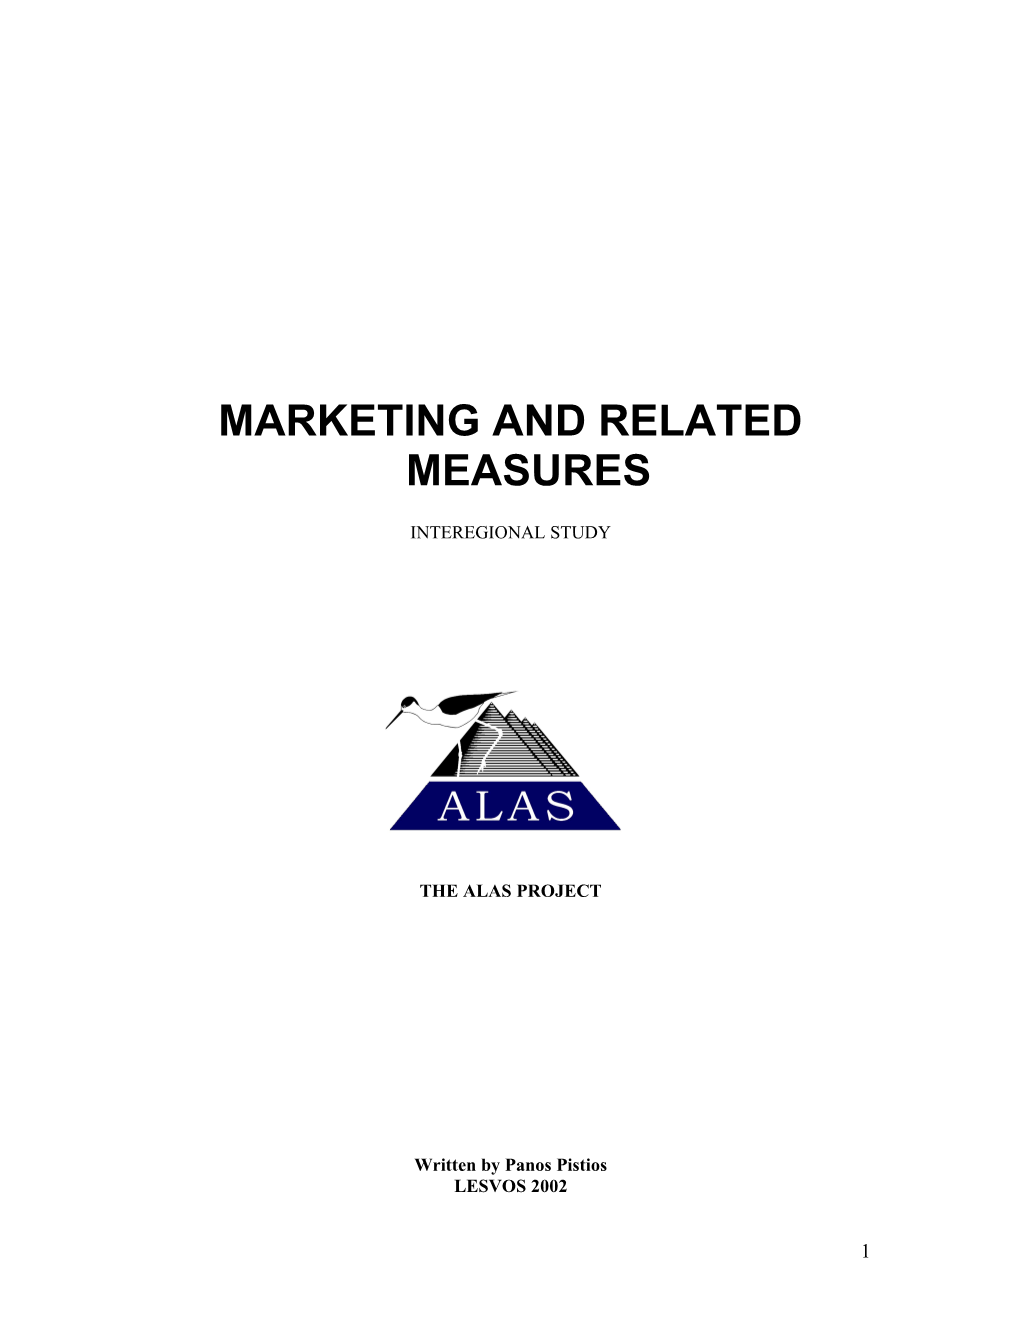 Marketing and Related Measures to Sell the Traditionally Produced Salt As a High-Quality Product